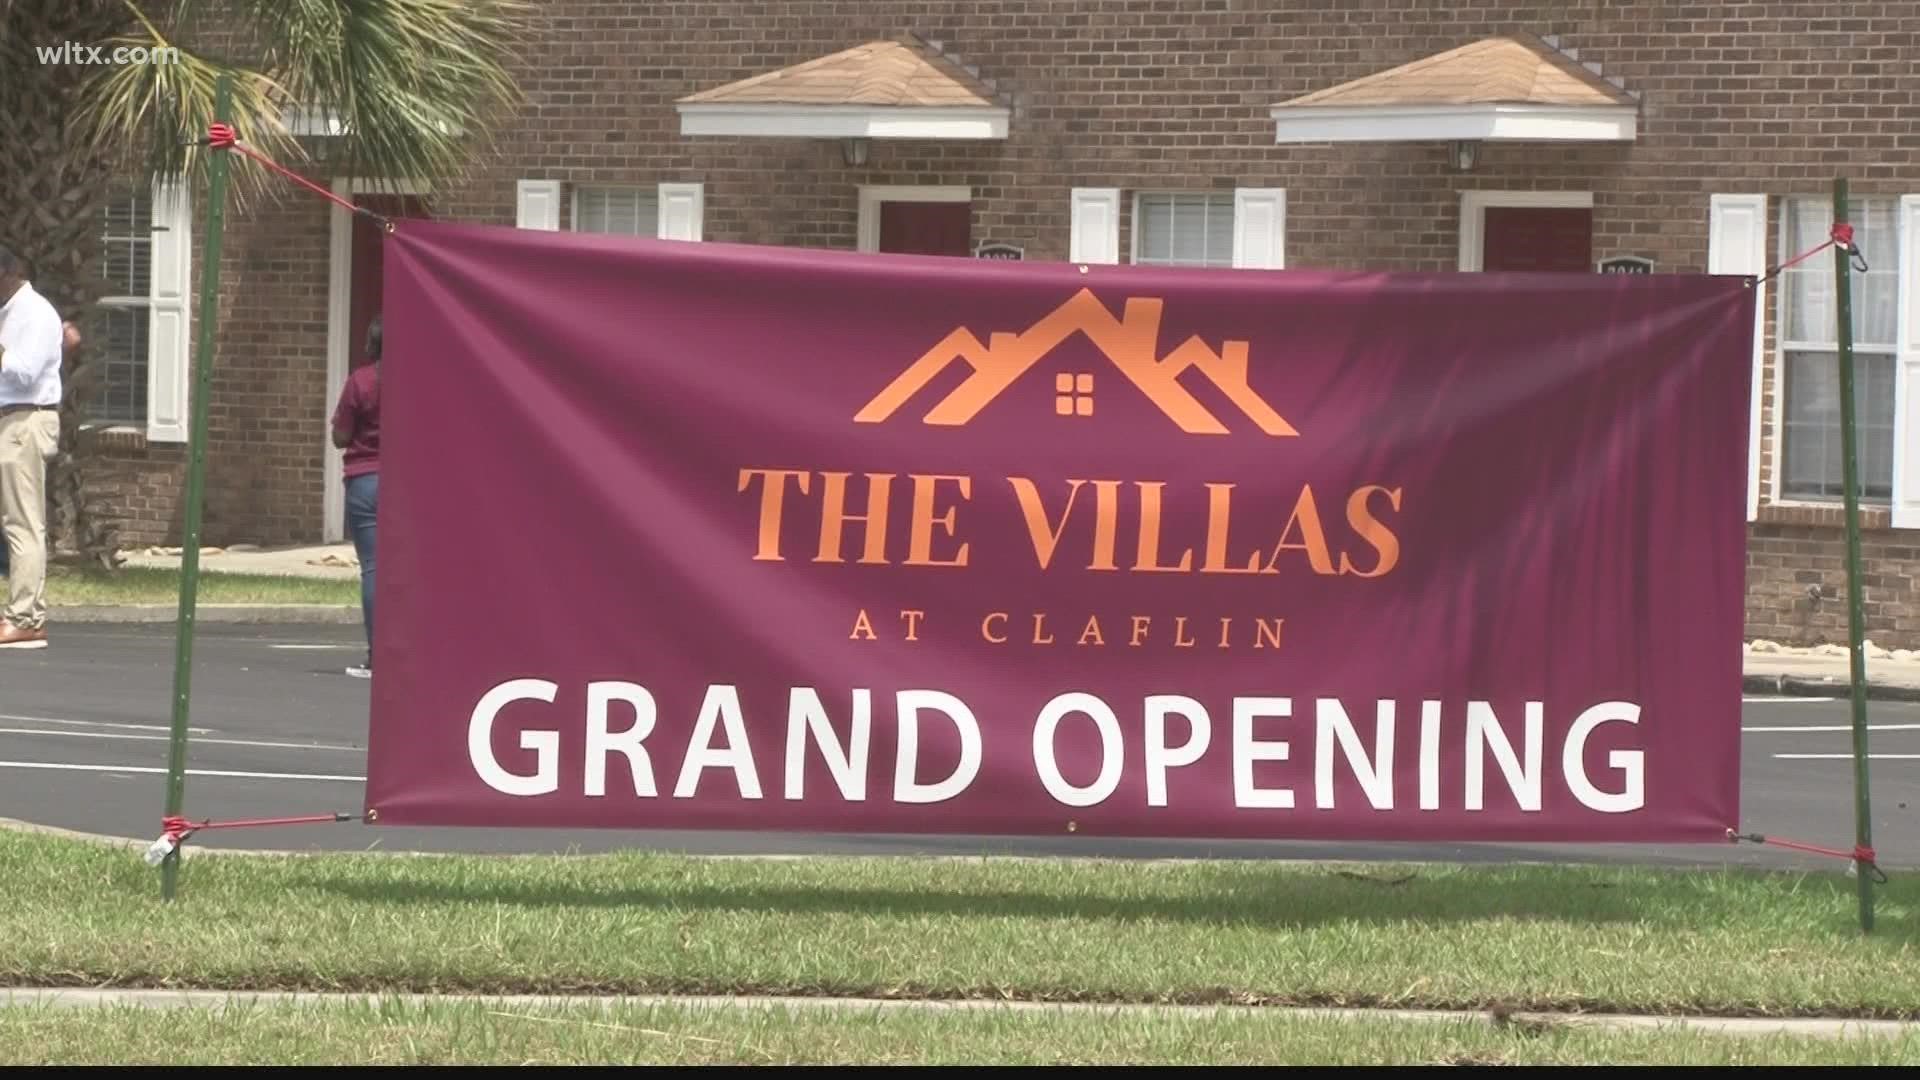 The new housing option, "The Villas at Claflin," is being offered at below market rate for staff and faculty of the university.